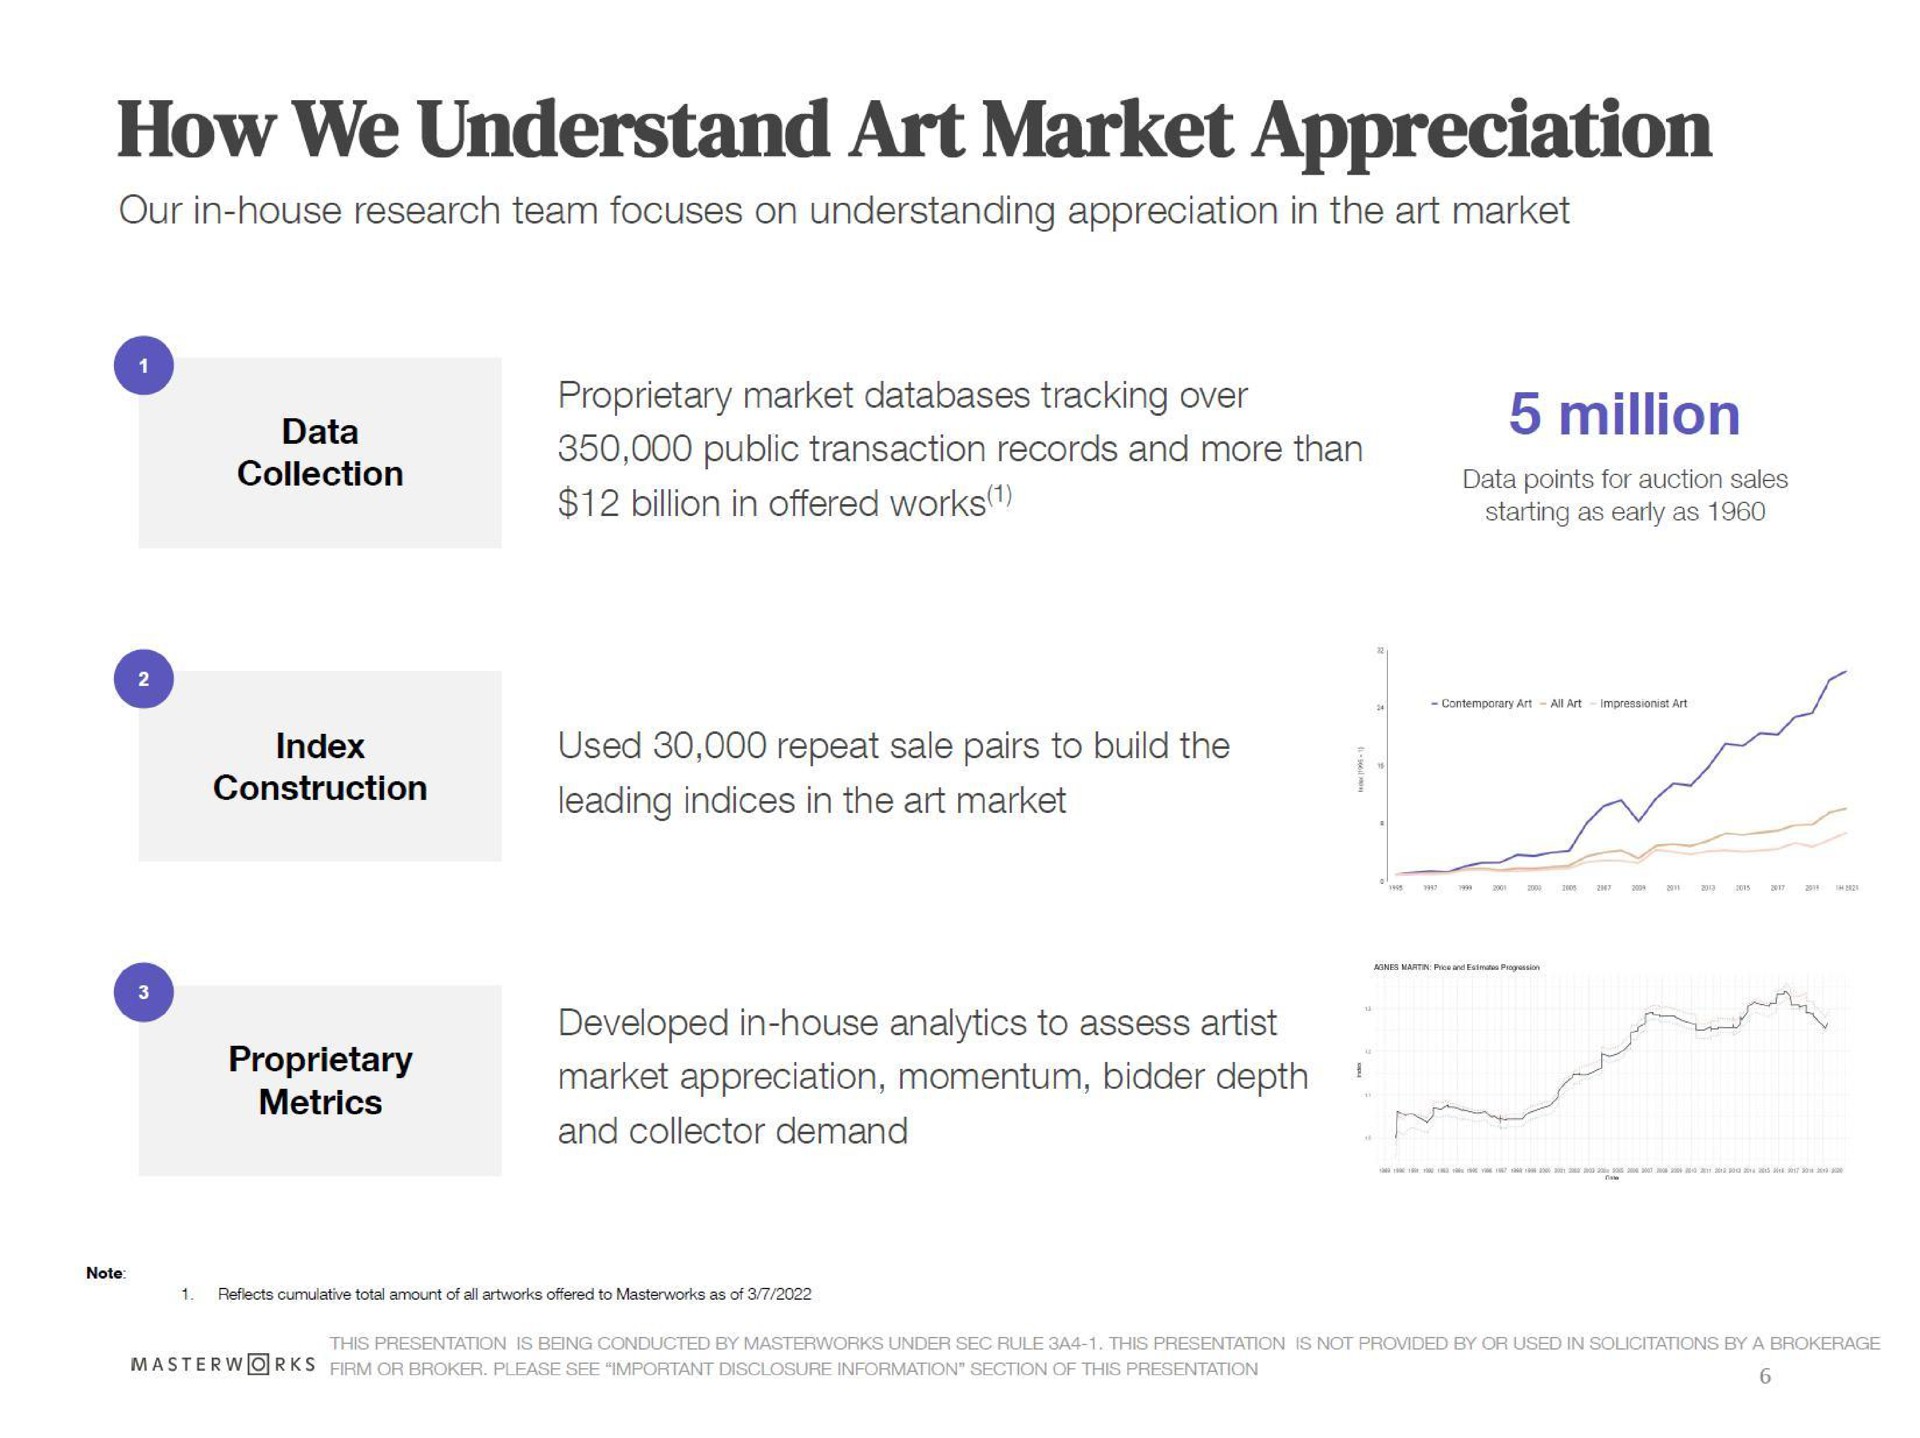 how we understand art market appreciation data tee see billion in offered works million starting as early as | Masterworks